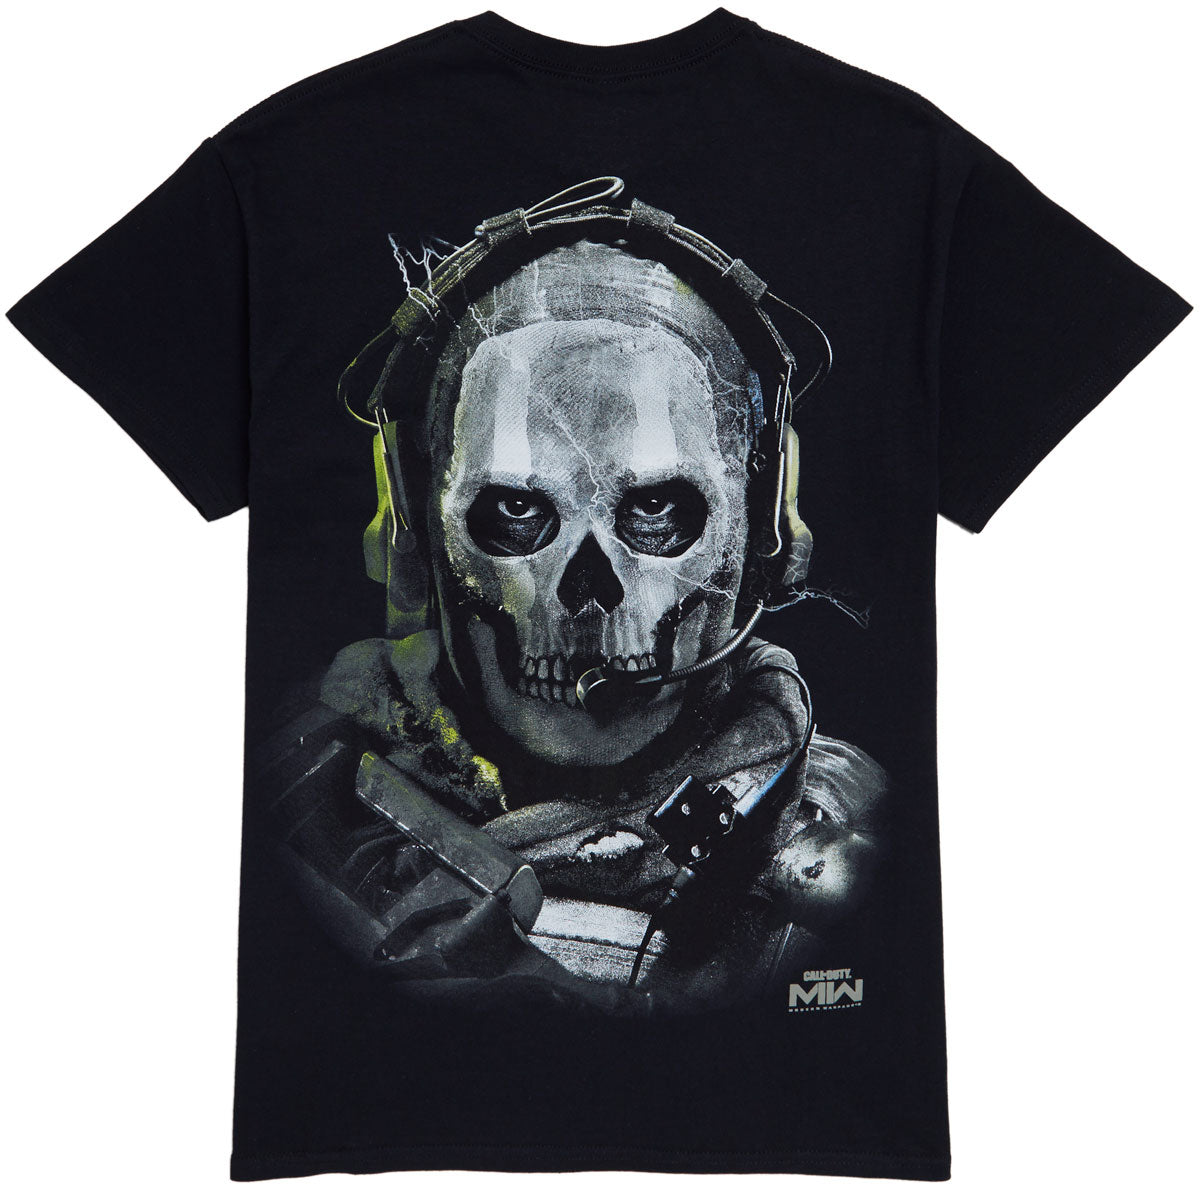 Primitive x Call Of Duty Ghost T-Shirt - Black image 1